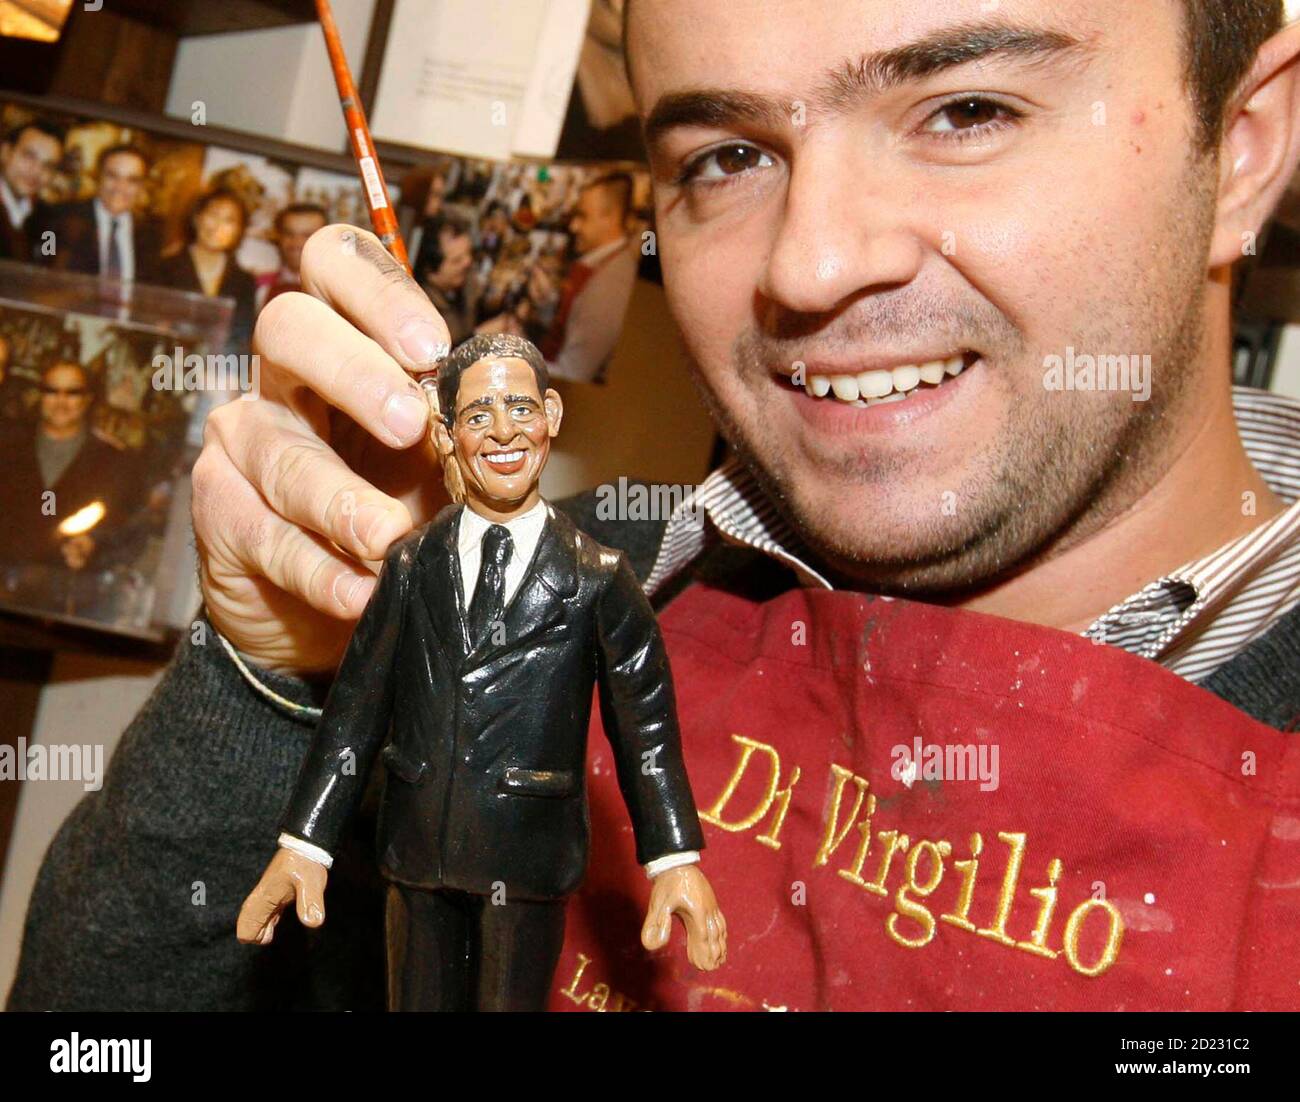 Craftsman Genny Di Virgilio holds a clay figure of U.S. President-elect Barack Obama, for use in Christmas nativity scenes, at his shop in Naples December 10, 2008. Obama and his wife Michelle are appearing in Italian nativity scenes this year, alongside the baby Jesus and wise men, according to Naples craftsmen selling figurines in the run-up to Christmas.     REUTERS/Ciro De Luca/Agnfoto   (ITALY) Stock Photo